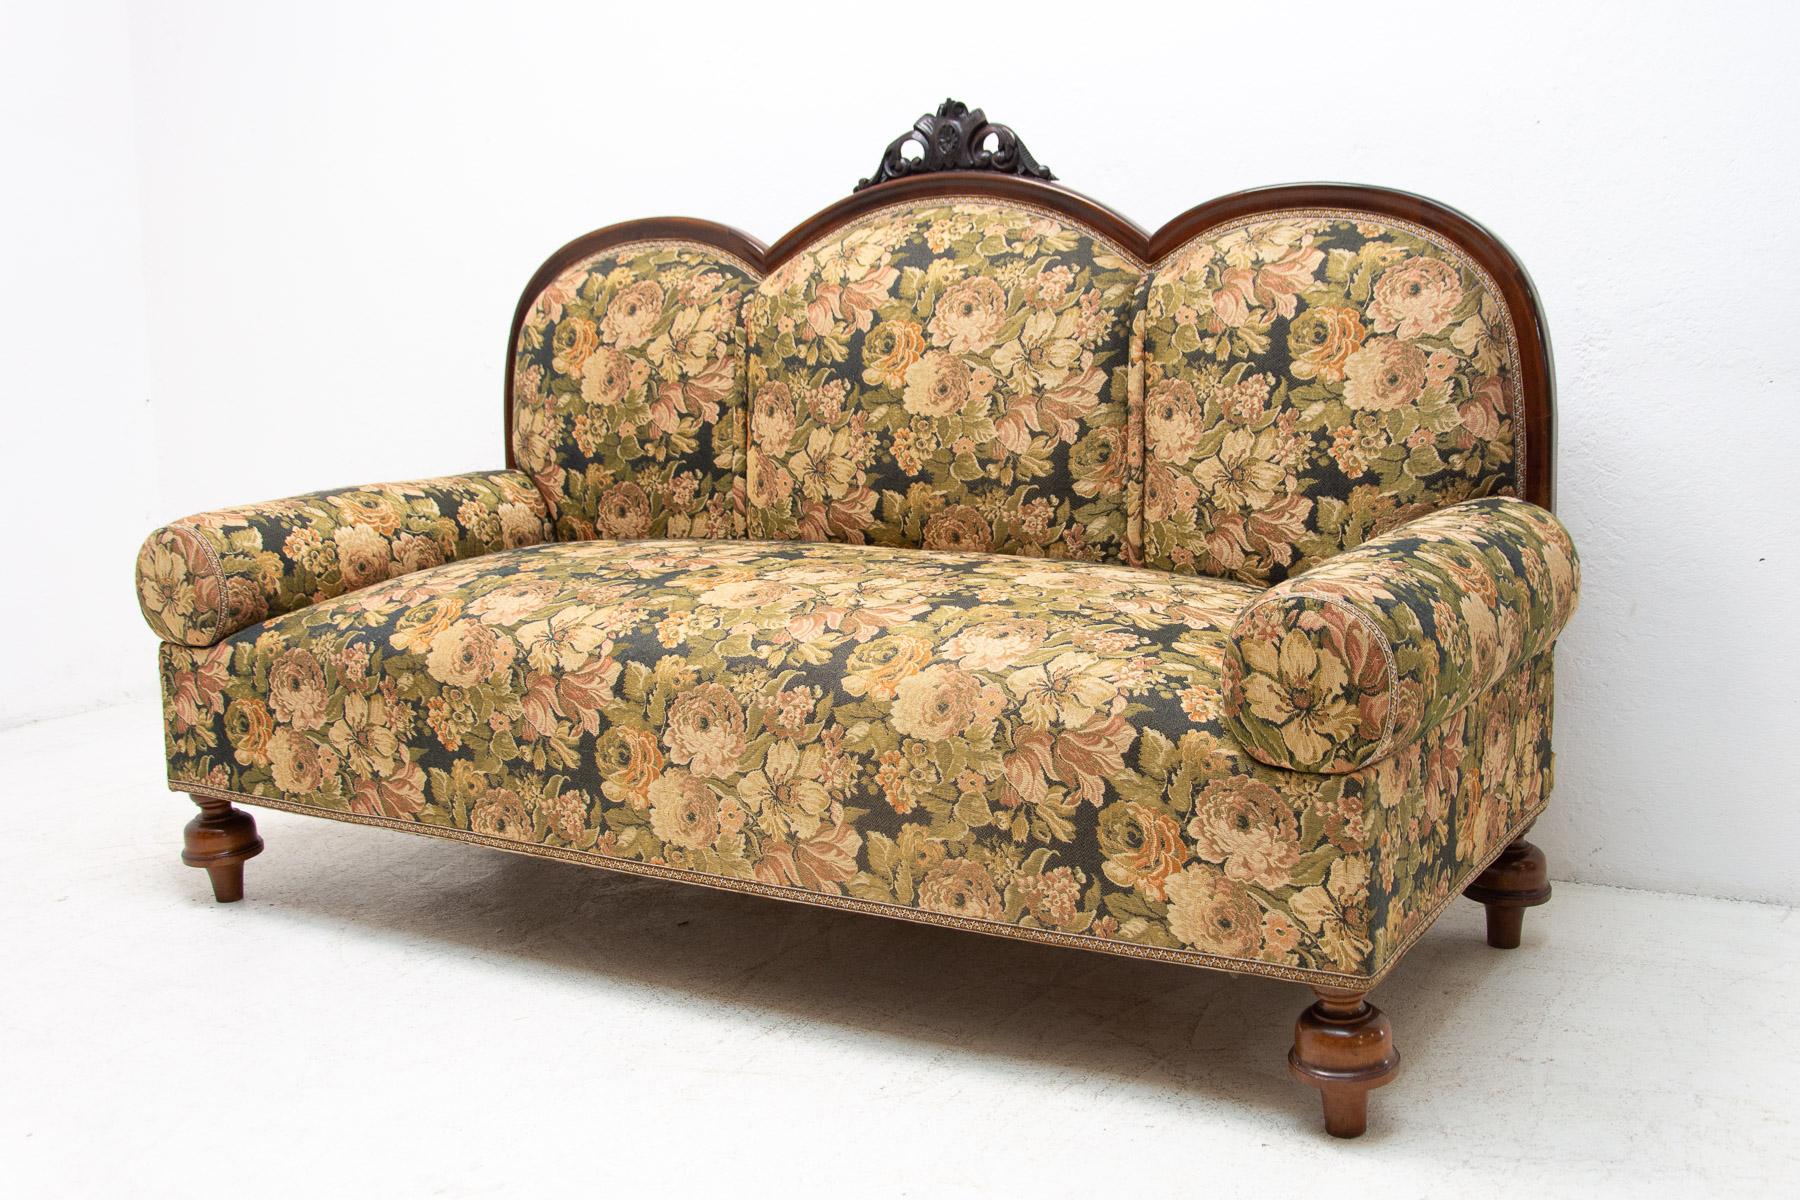 Upholstered sofa in the historicizing style, walnut, floral fabric. Made at the turn of the 19th and 20th Century in Austria Hungary.
In very good condition, it was renovated in the past.

Measures: 189 x 76 cm

Height : 113 cm

Seat height :